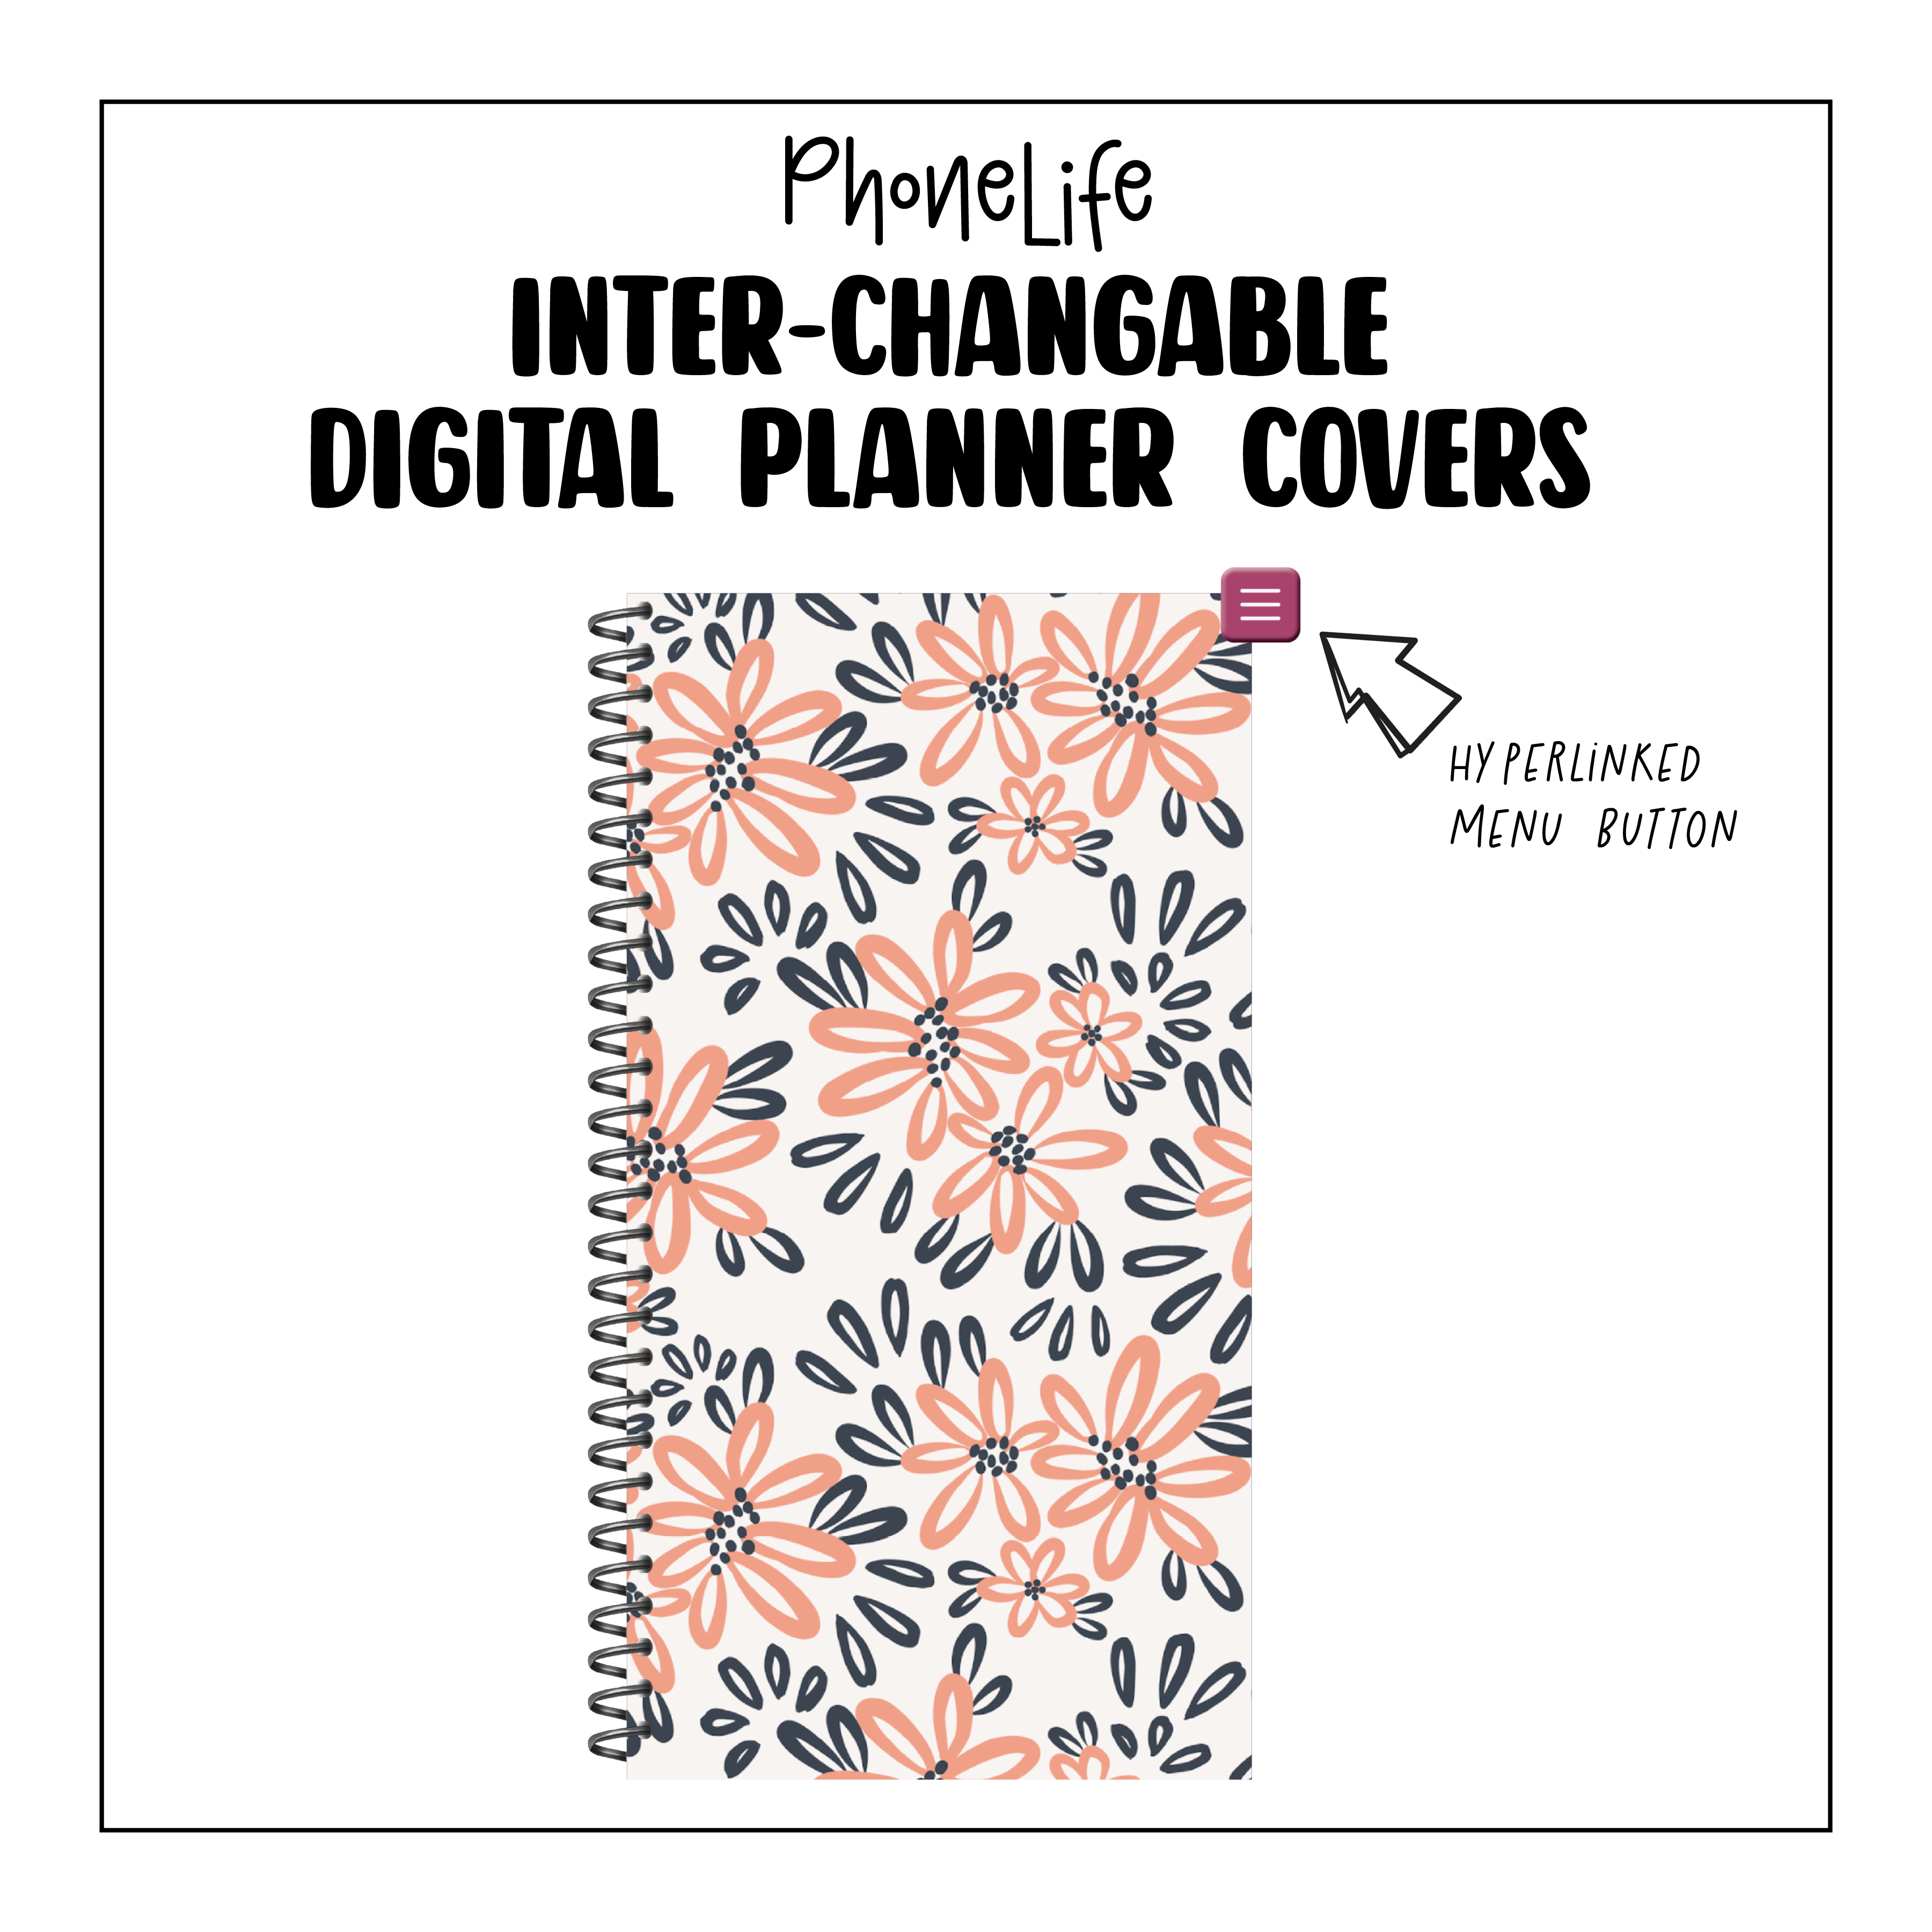 PhoneLife Interchangeable Digital Planner Cover | MIDNIGHT BOHO BLOSSOMS 3